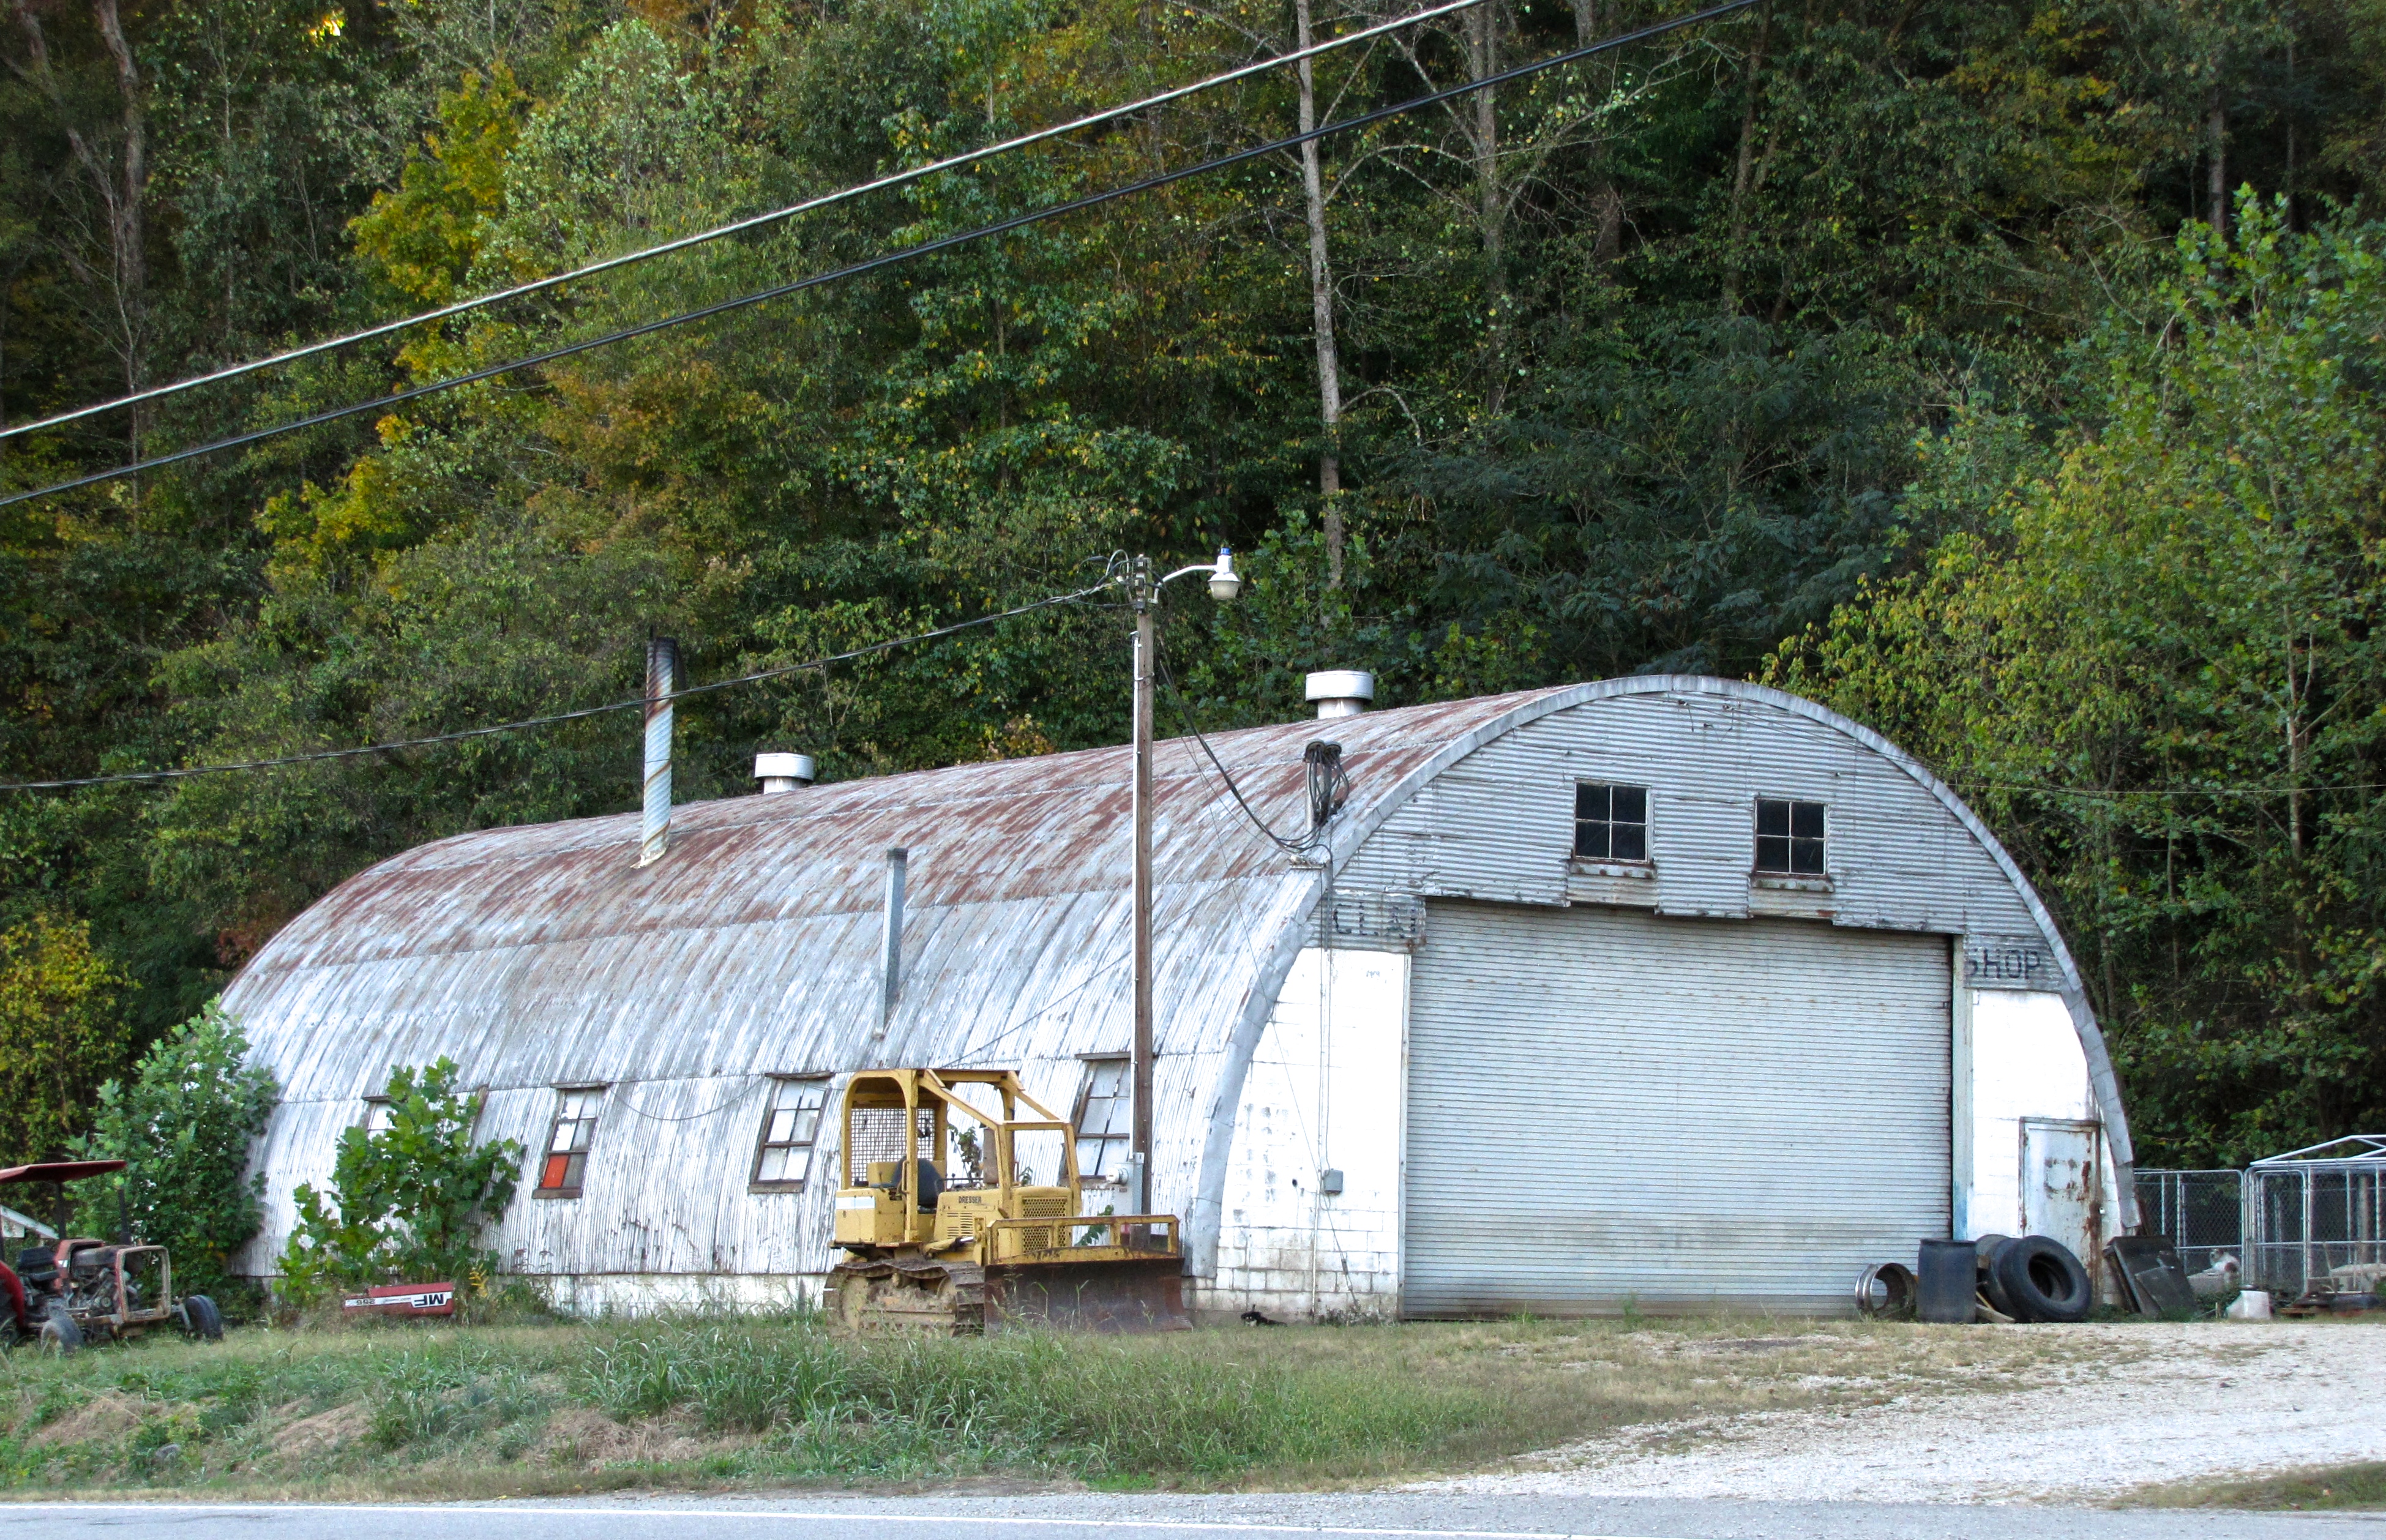 quonset hut in Linden, PA